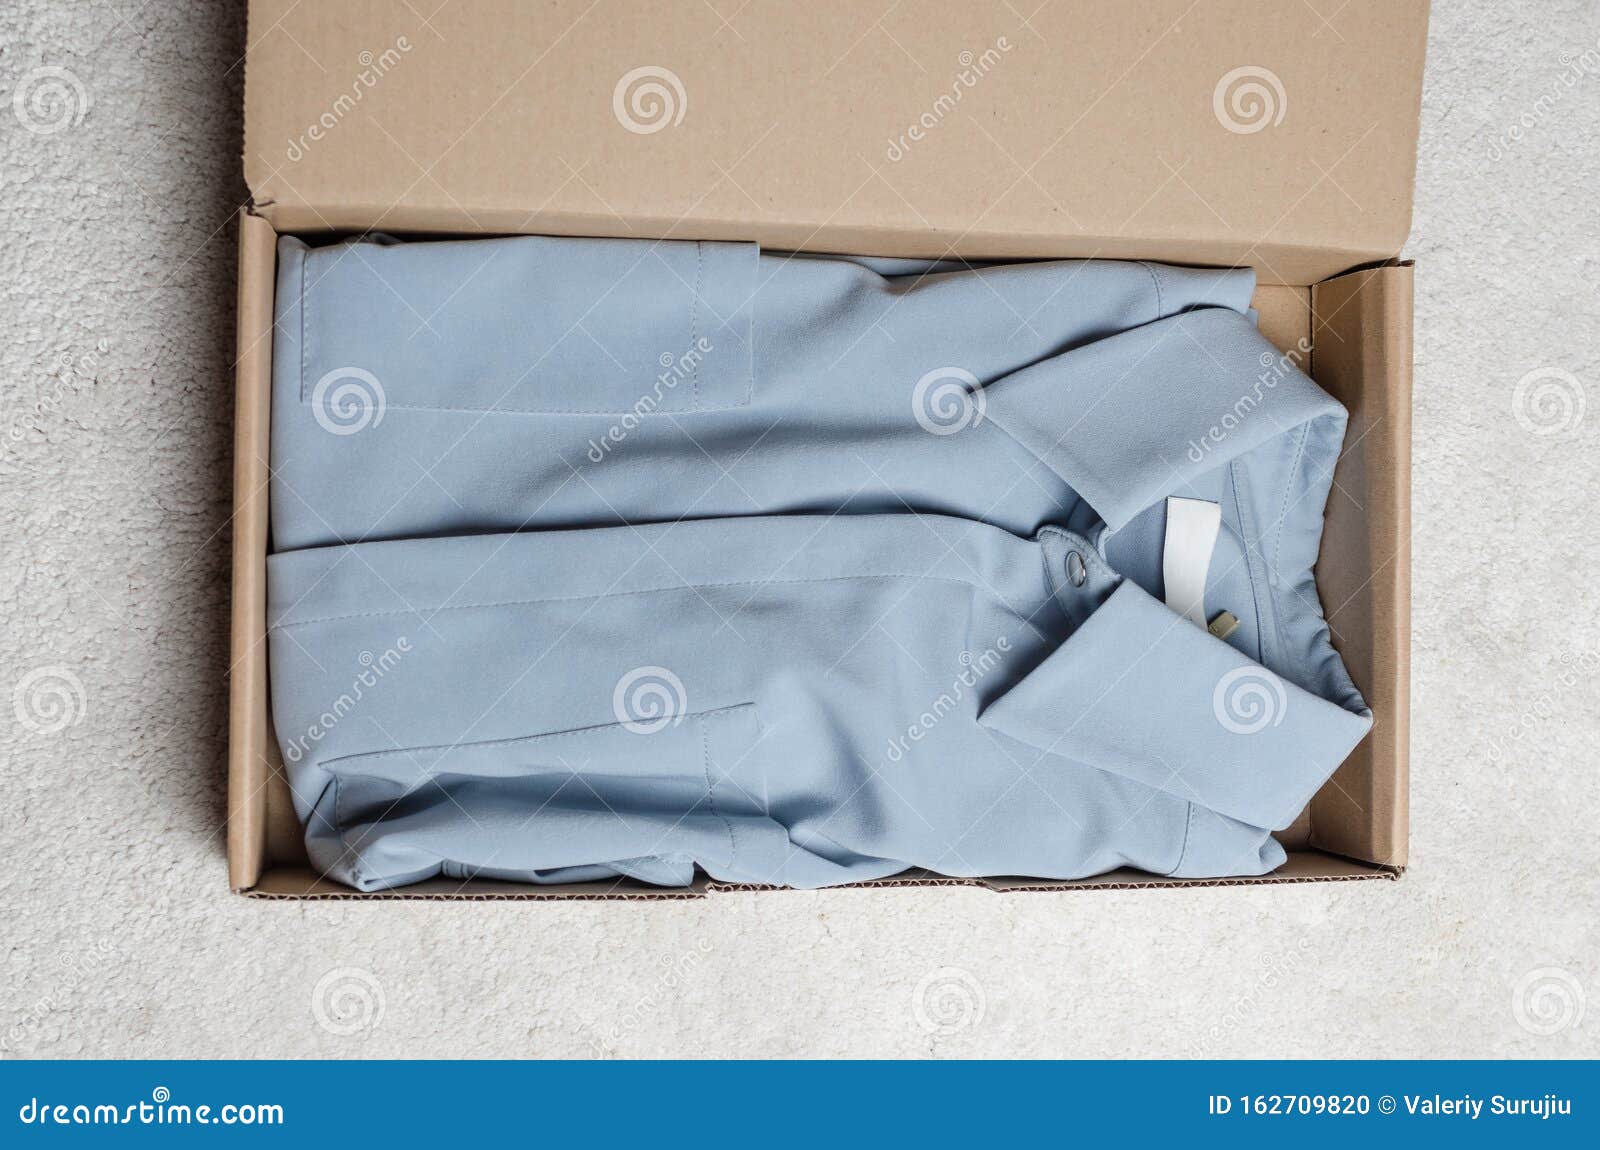 Light blue dress in a box stock photo. Image of anonymous - 26